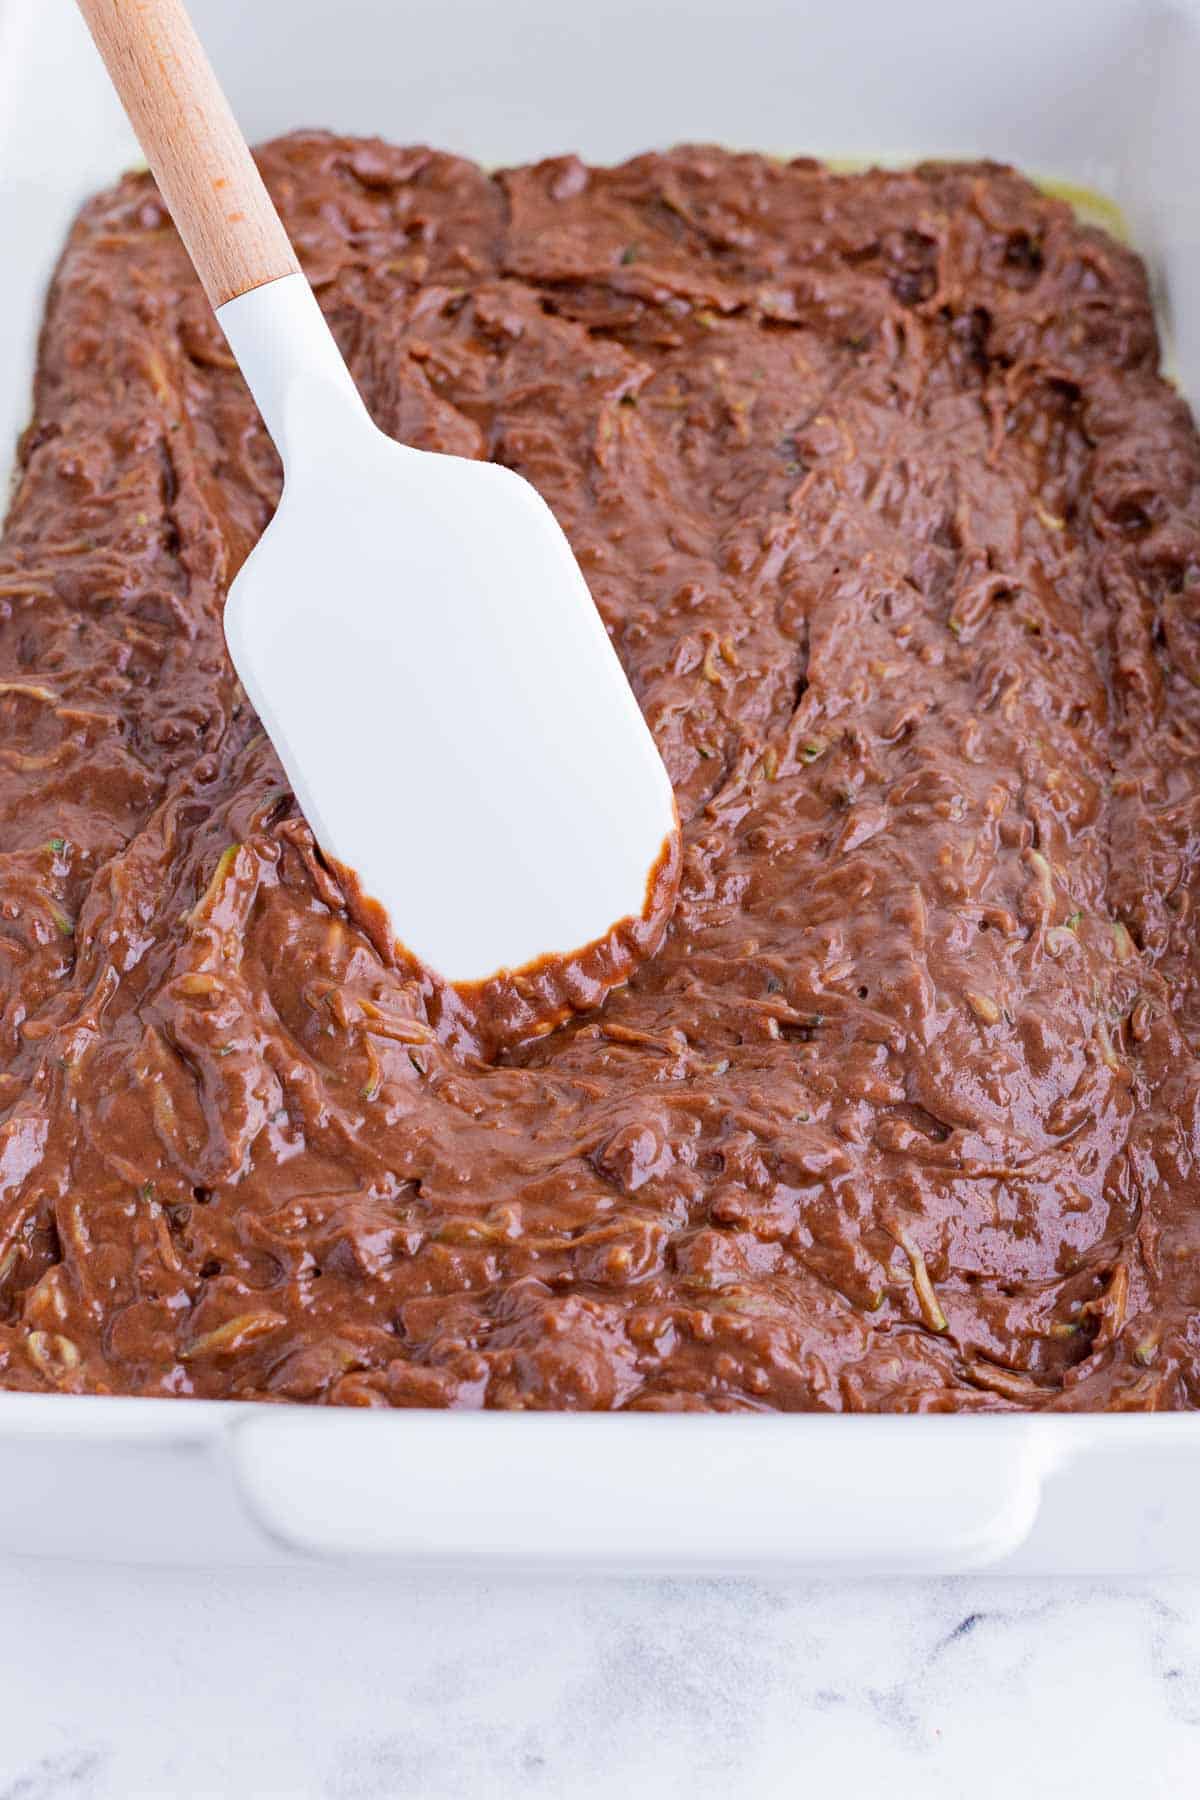 Zucchini brownie batter is spread in a pan.